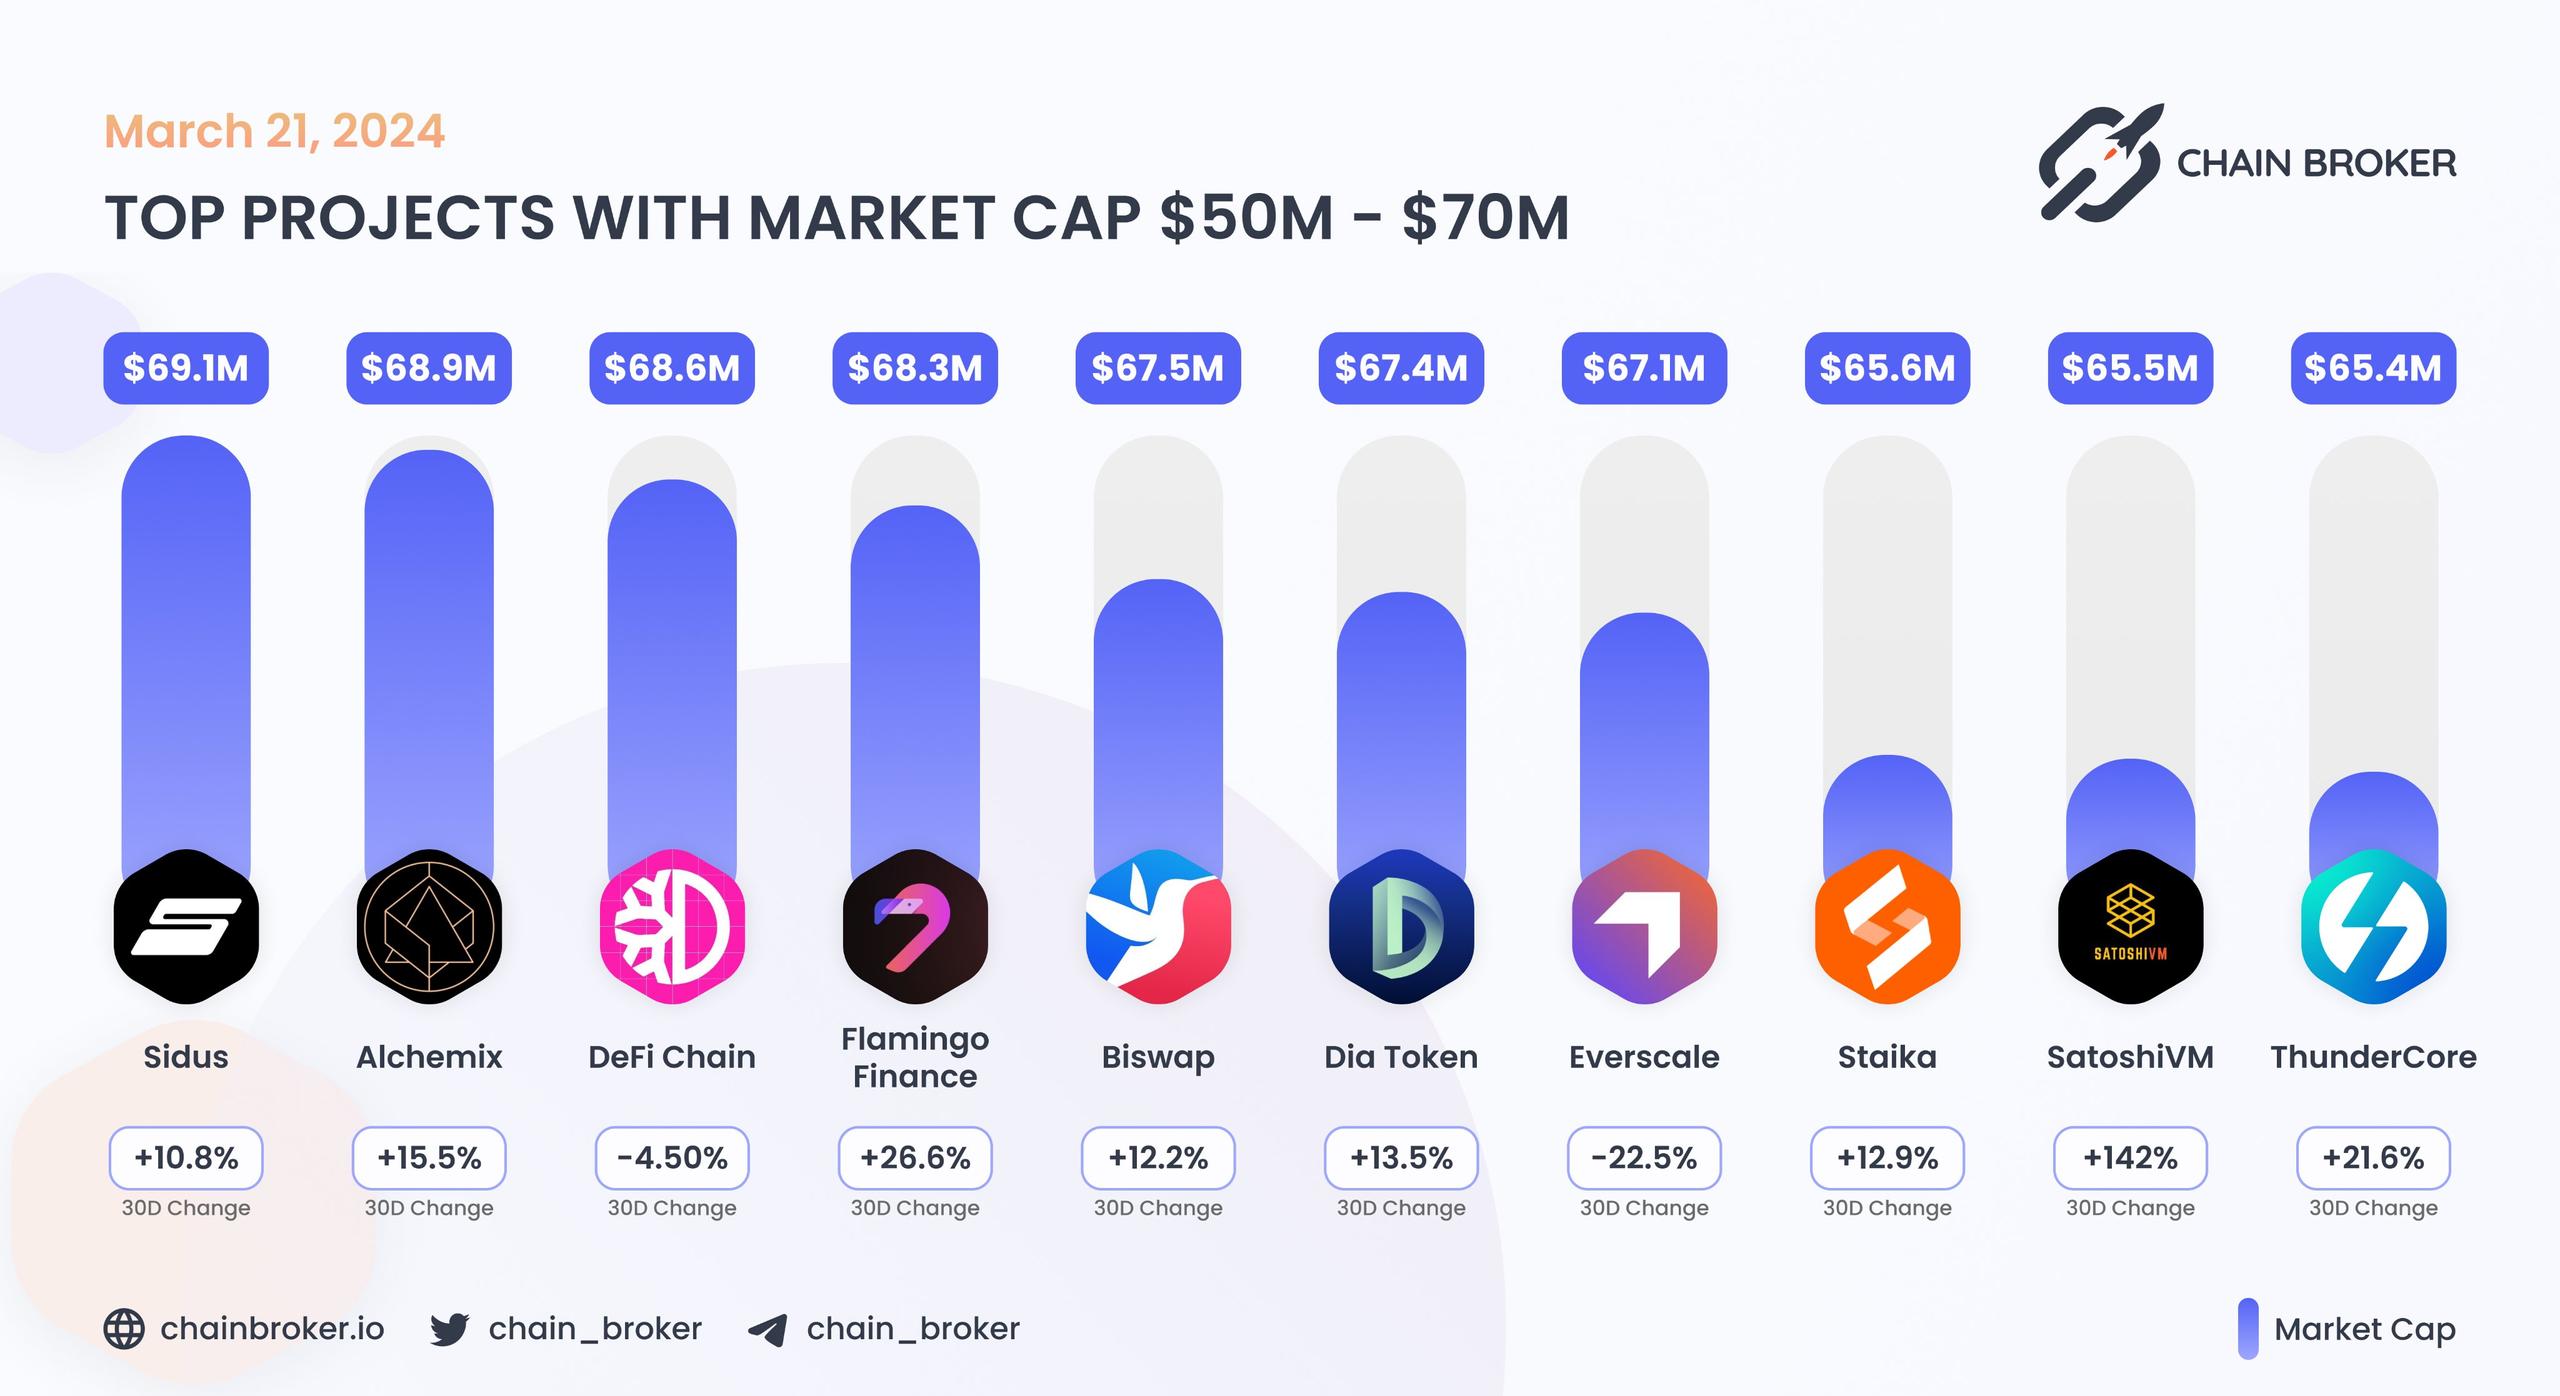 Top projects with Market Cap $50M - $70M